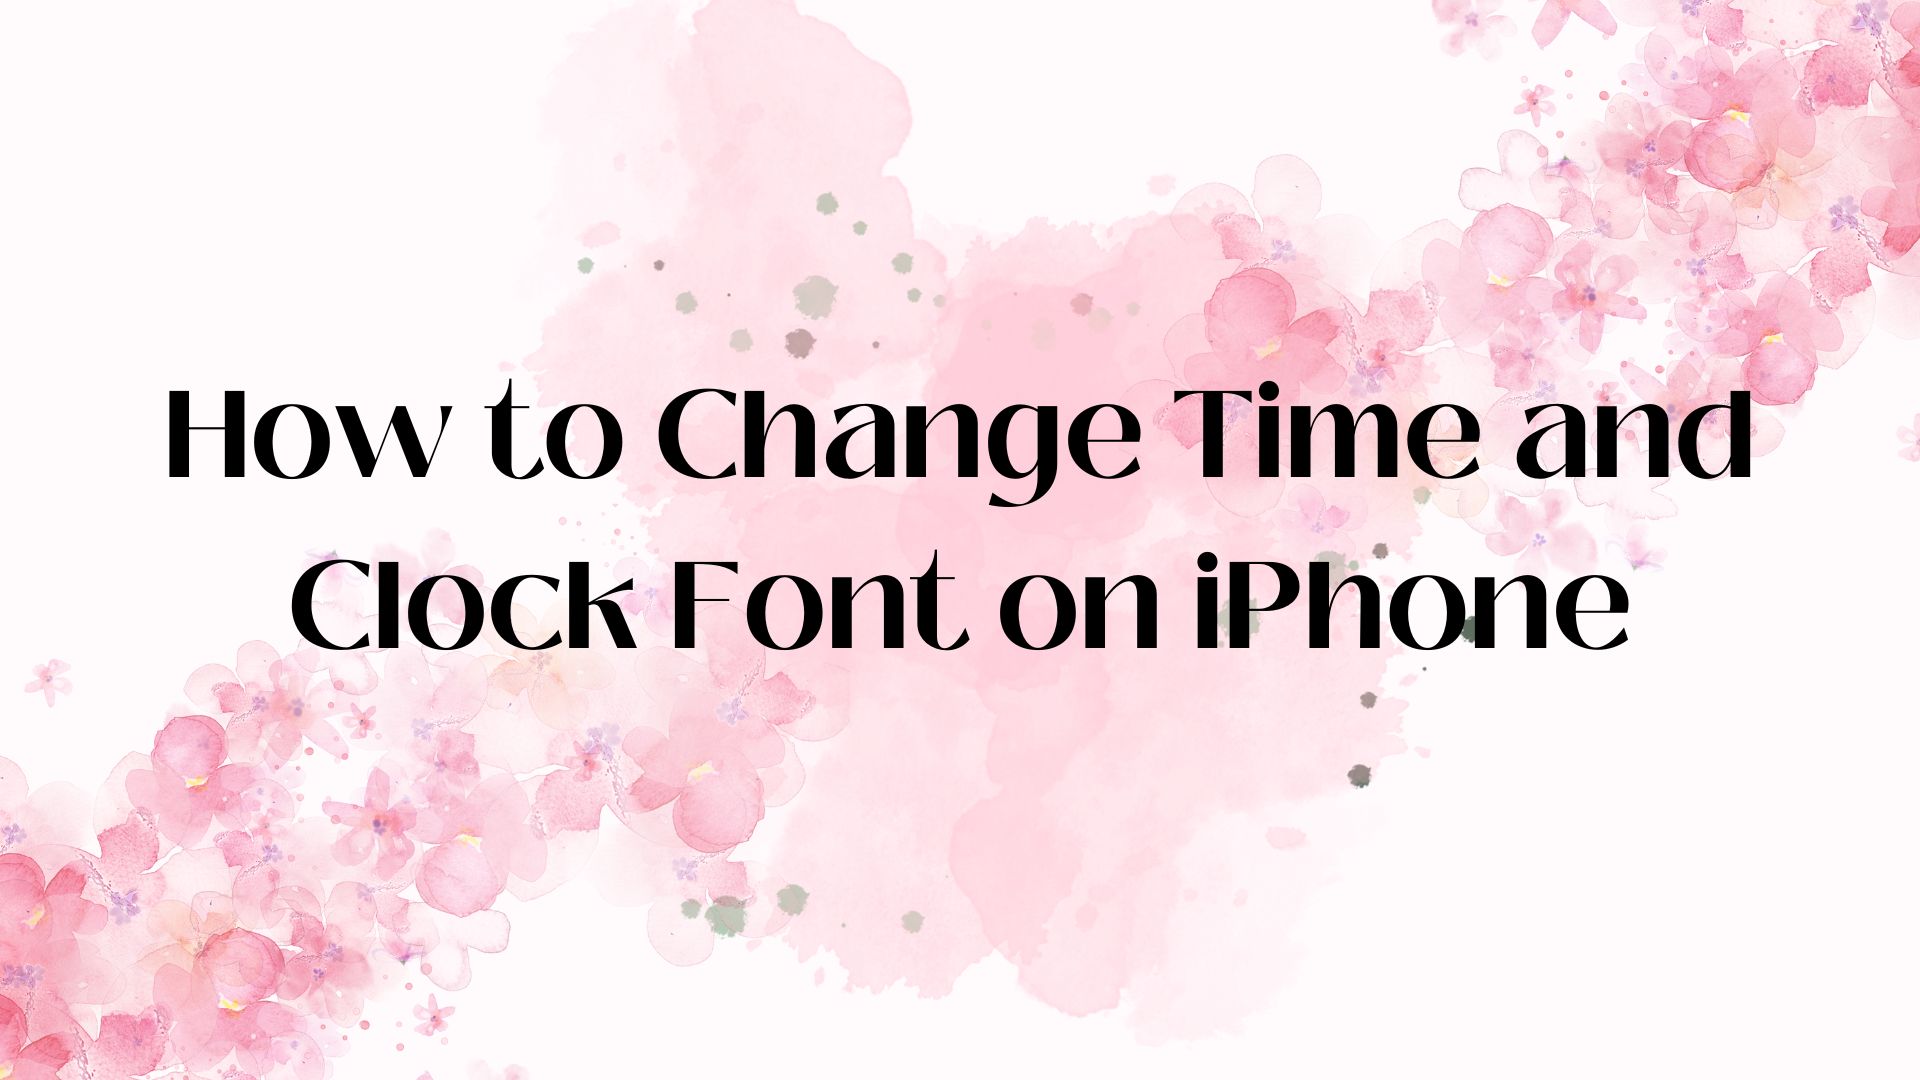 How to Change Time and Clock Font on iPhone - Pttrns